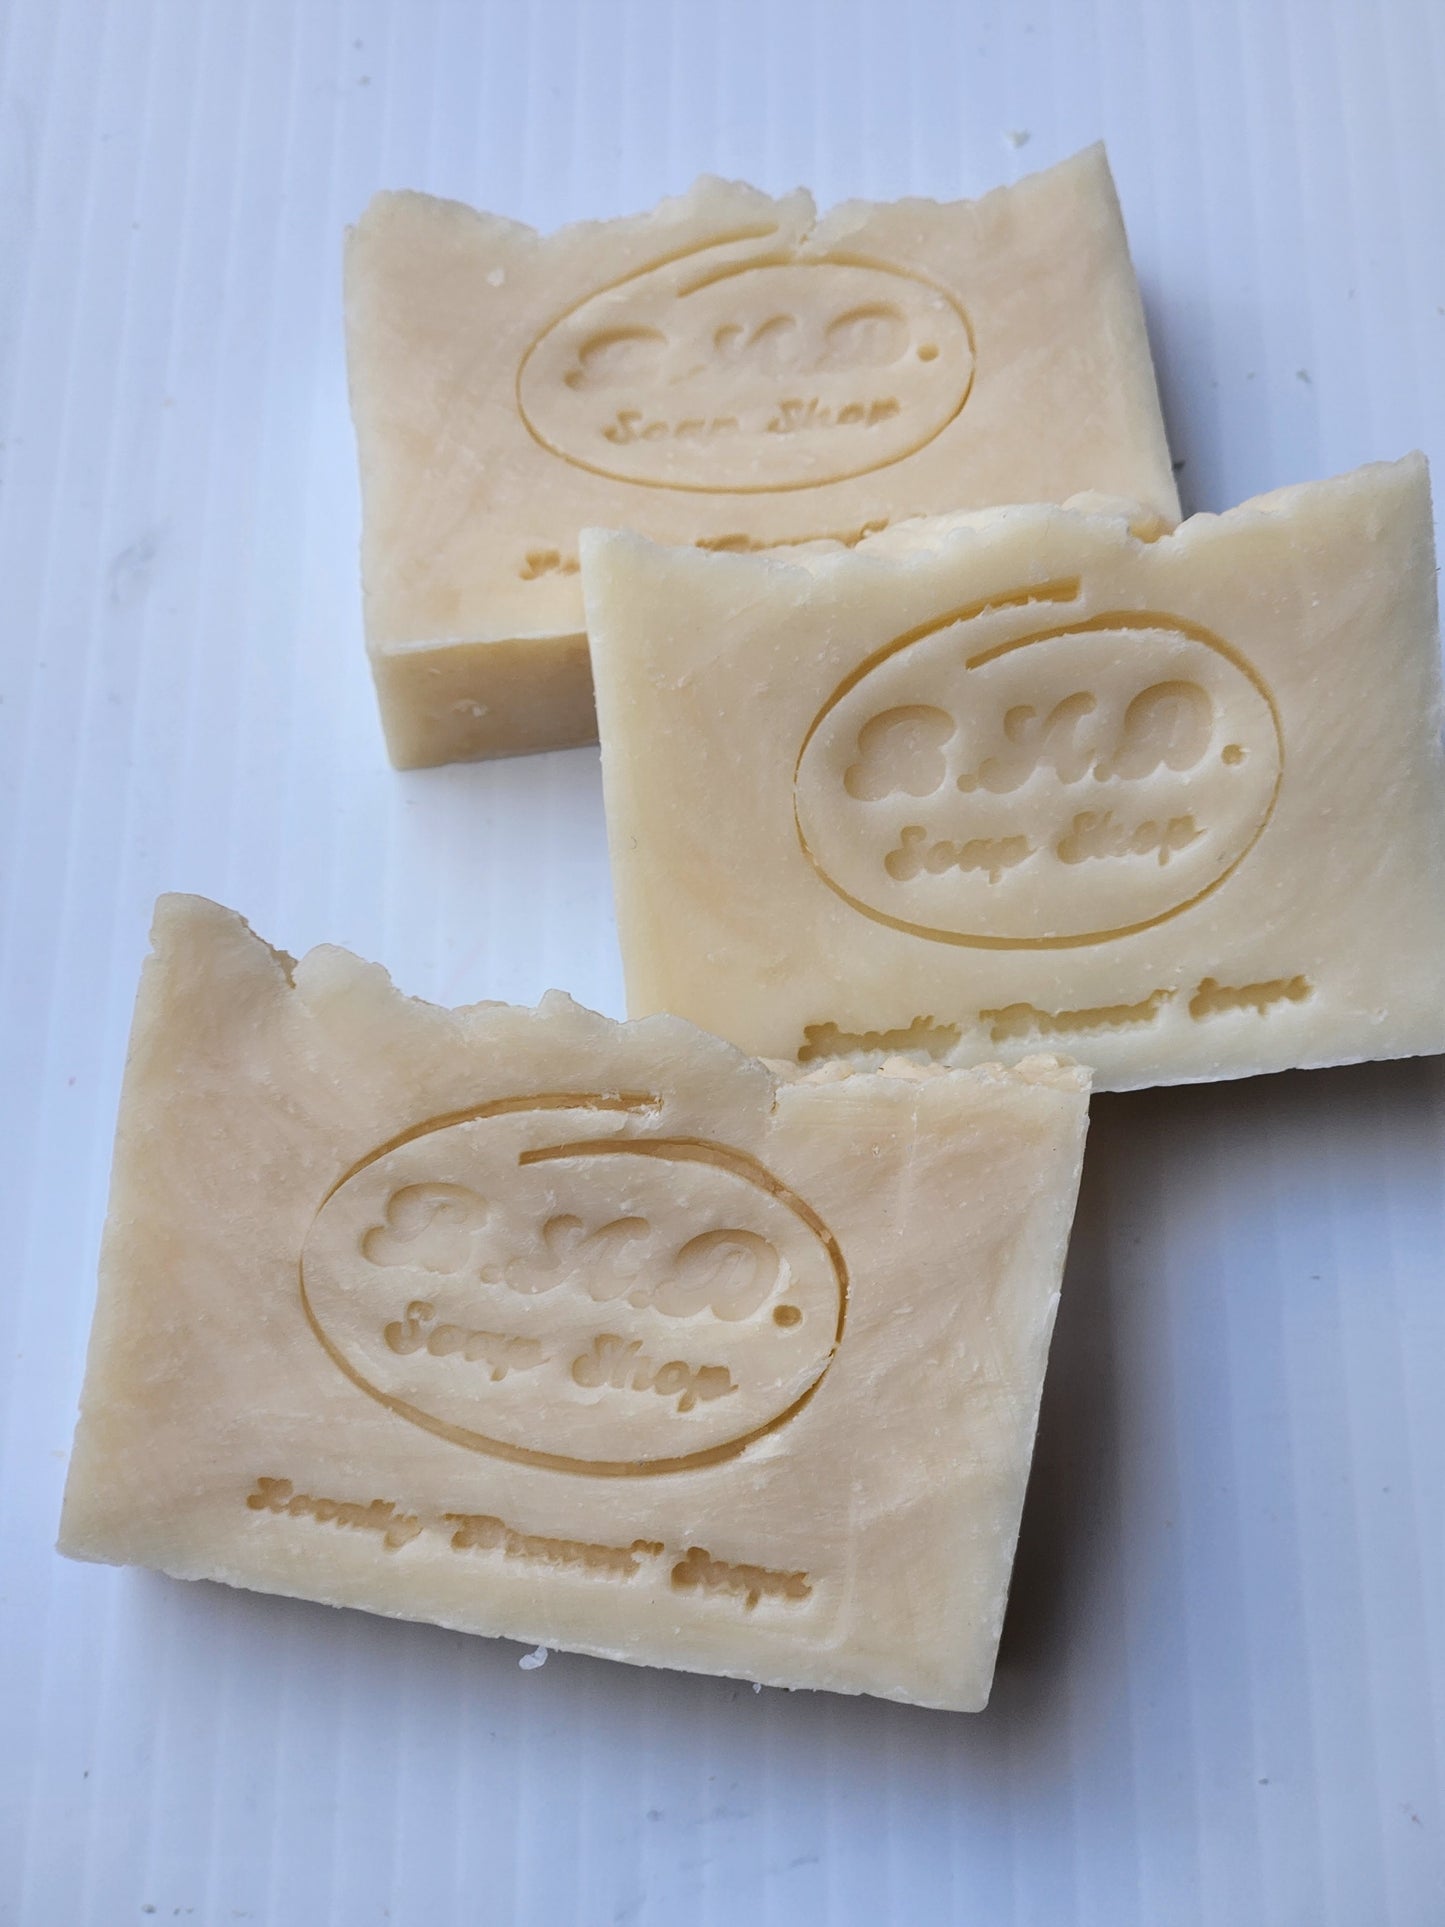 Natural "Patchouli" Handmade Soap with Dark Patchouli Essential Oil